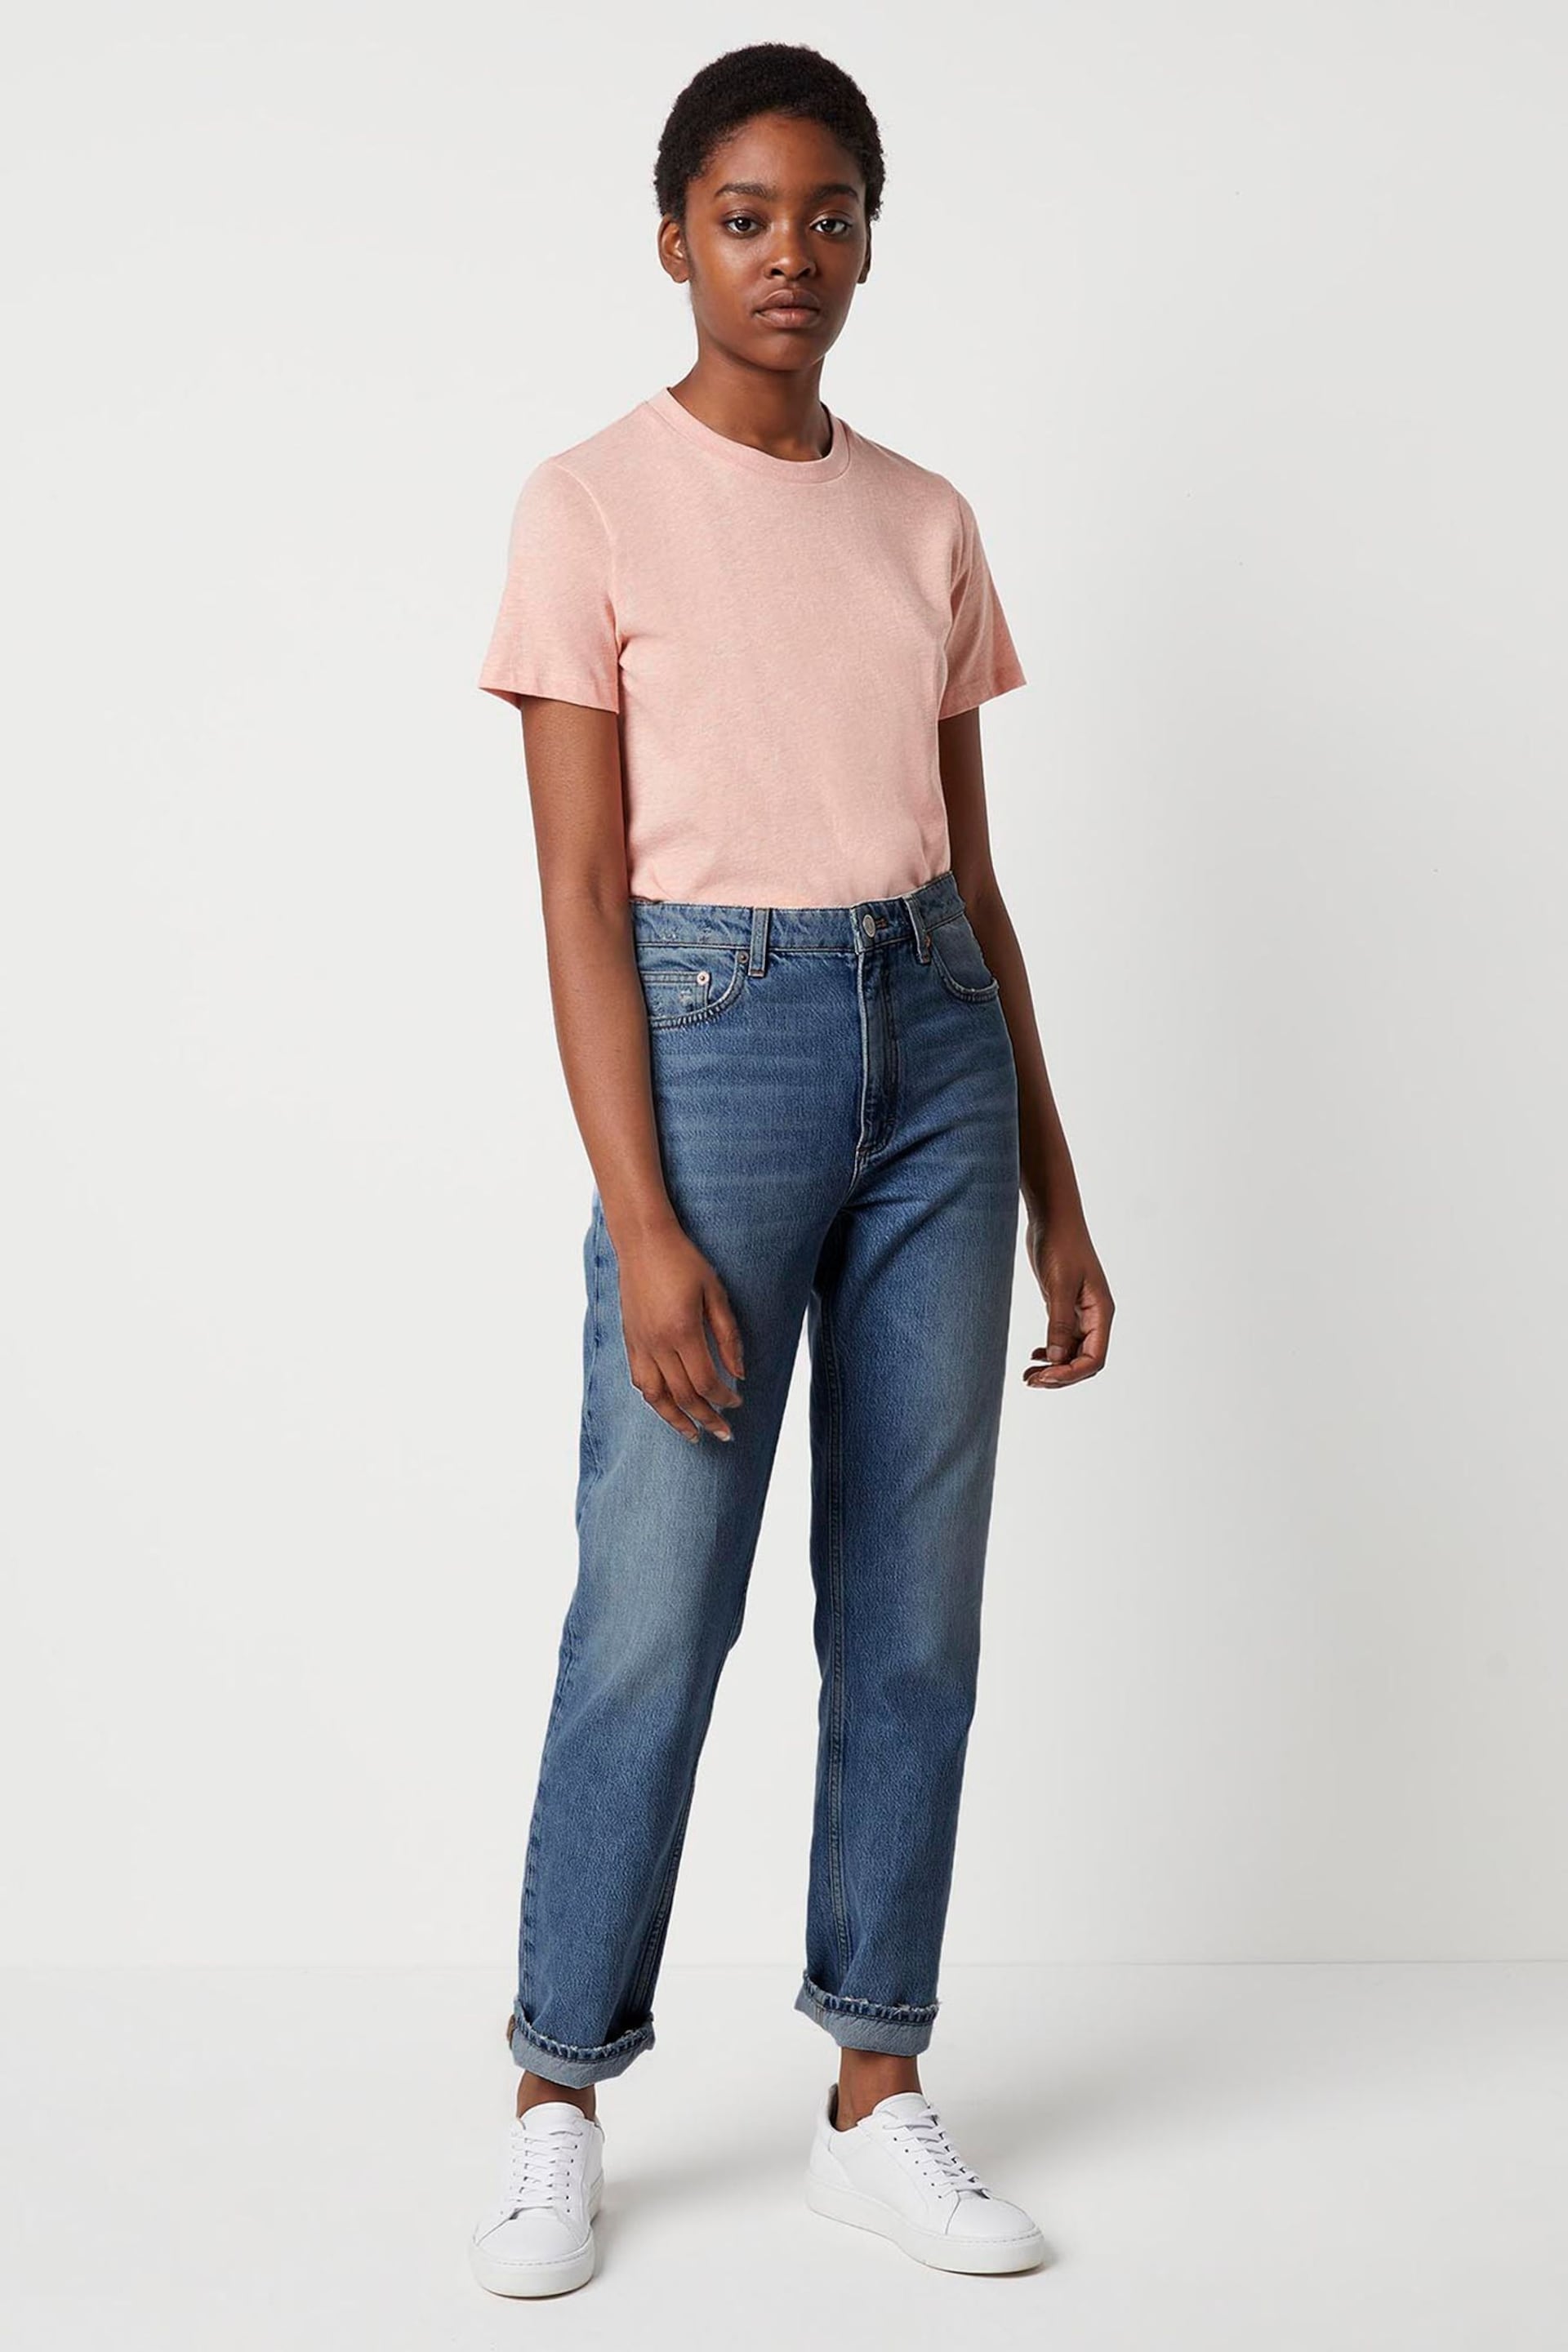 French Connection Comfort Stretch High Rise Straight Leg Jeans - Image 1 of 3